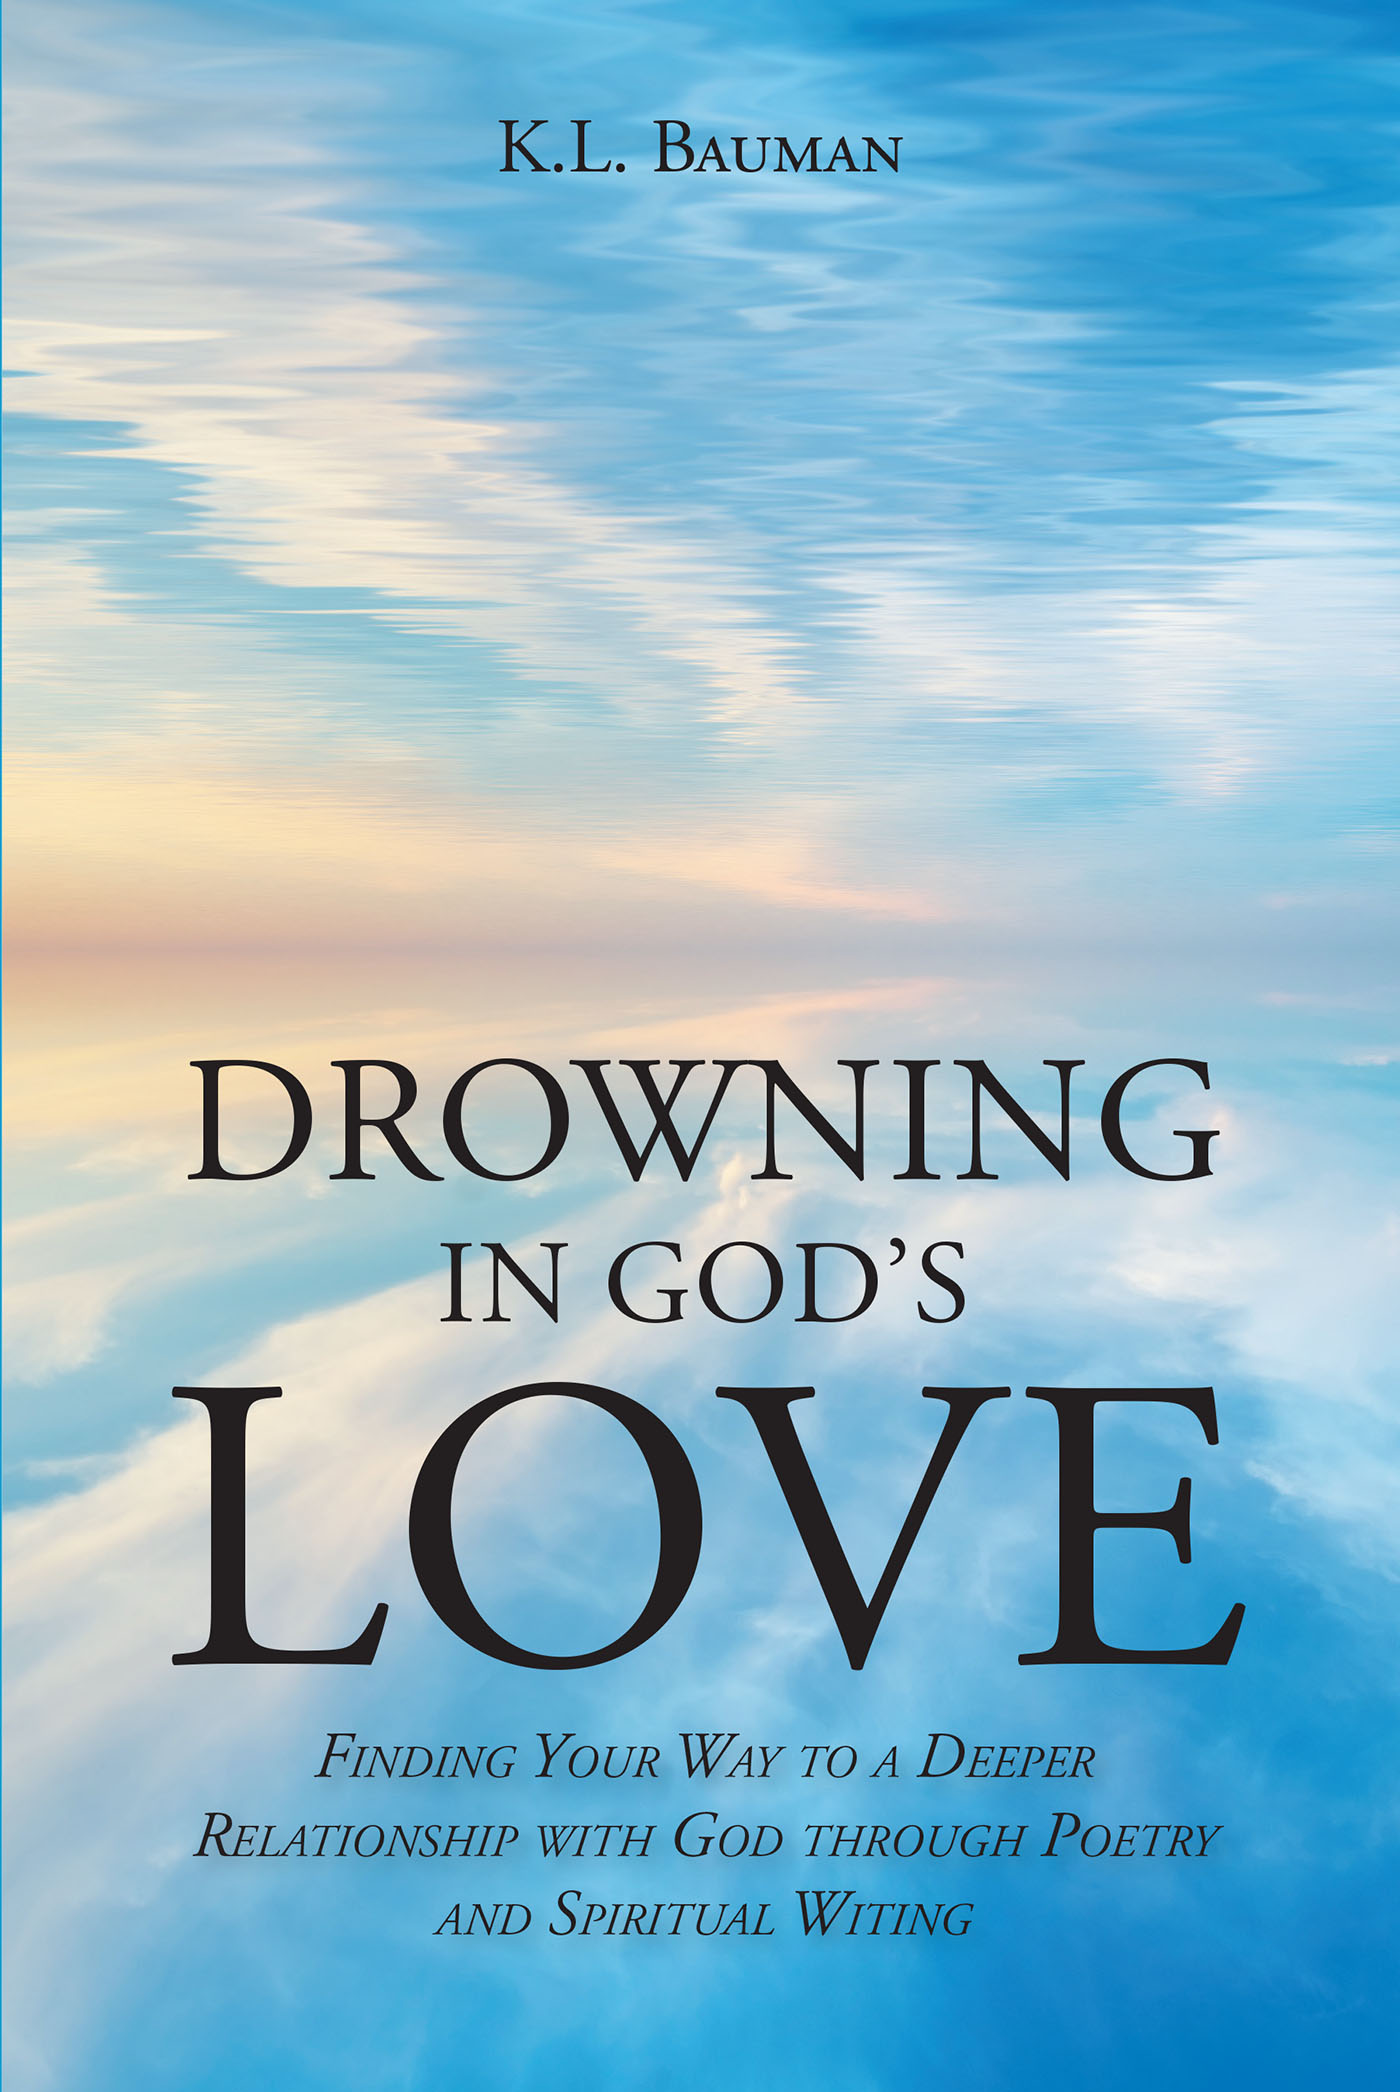 Author K.L. Bauman’s New Book, "Drowning in God's Love," Explores the Author's Connection with God Through Poetry and How Others Can Achieve a Similar Relationship